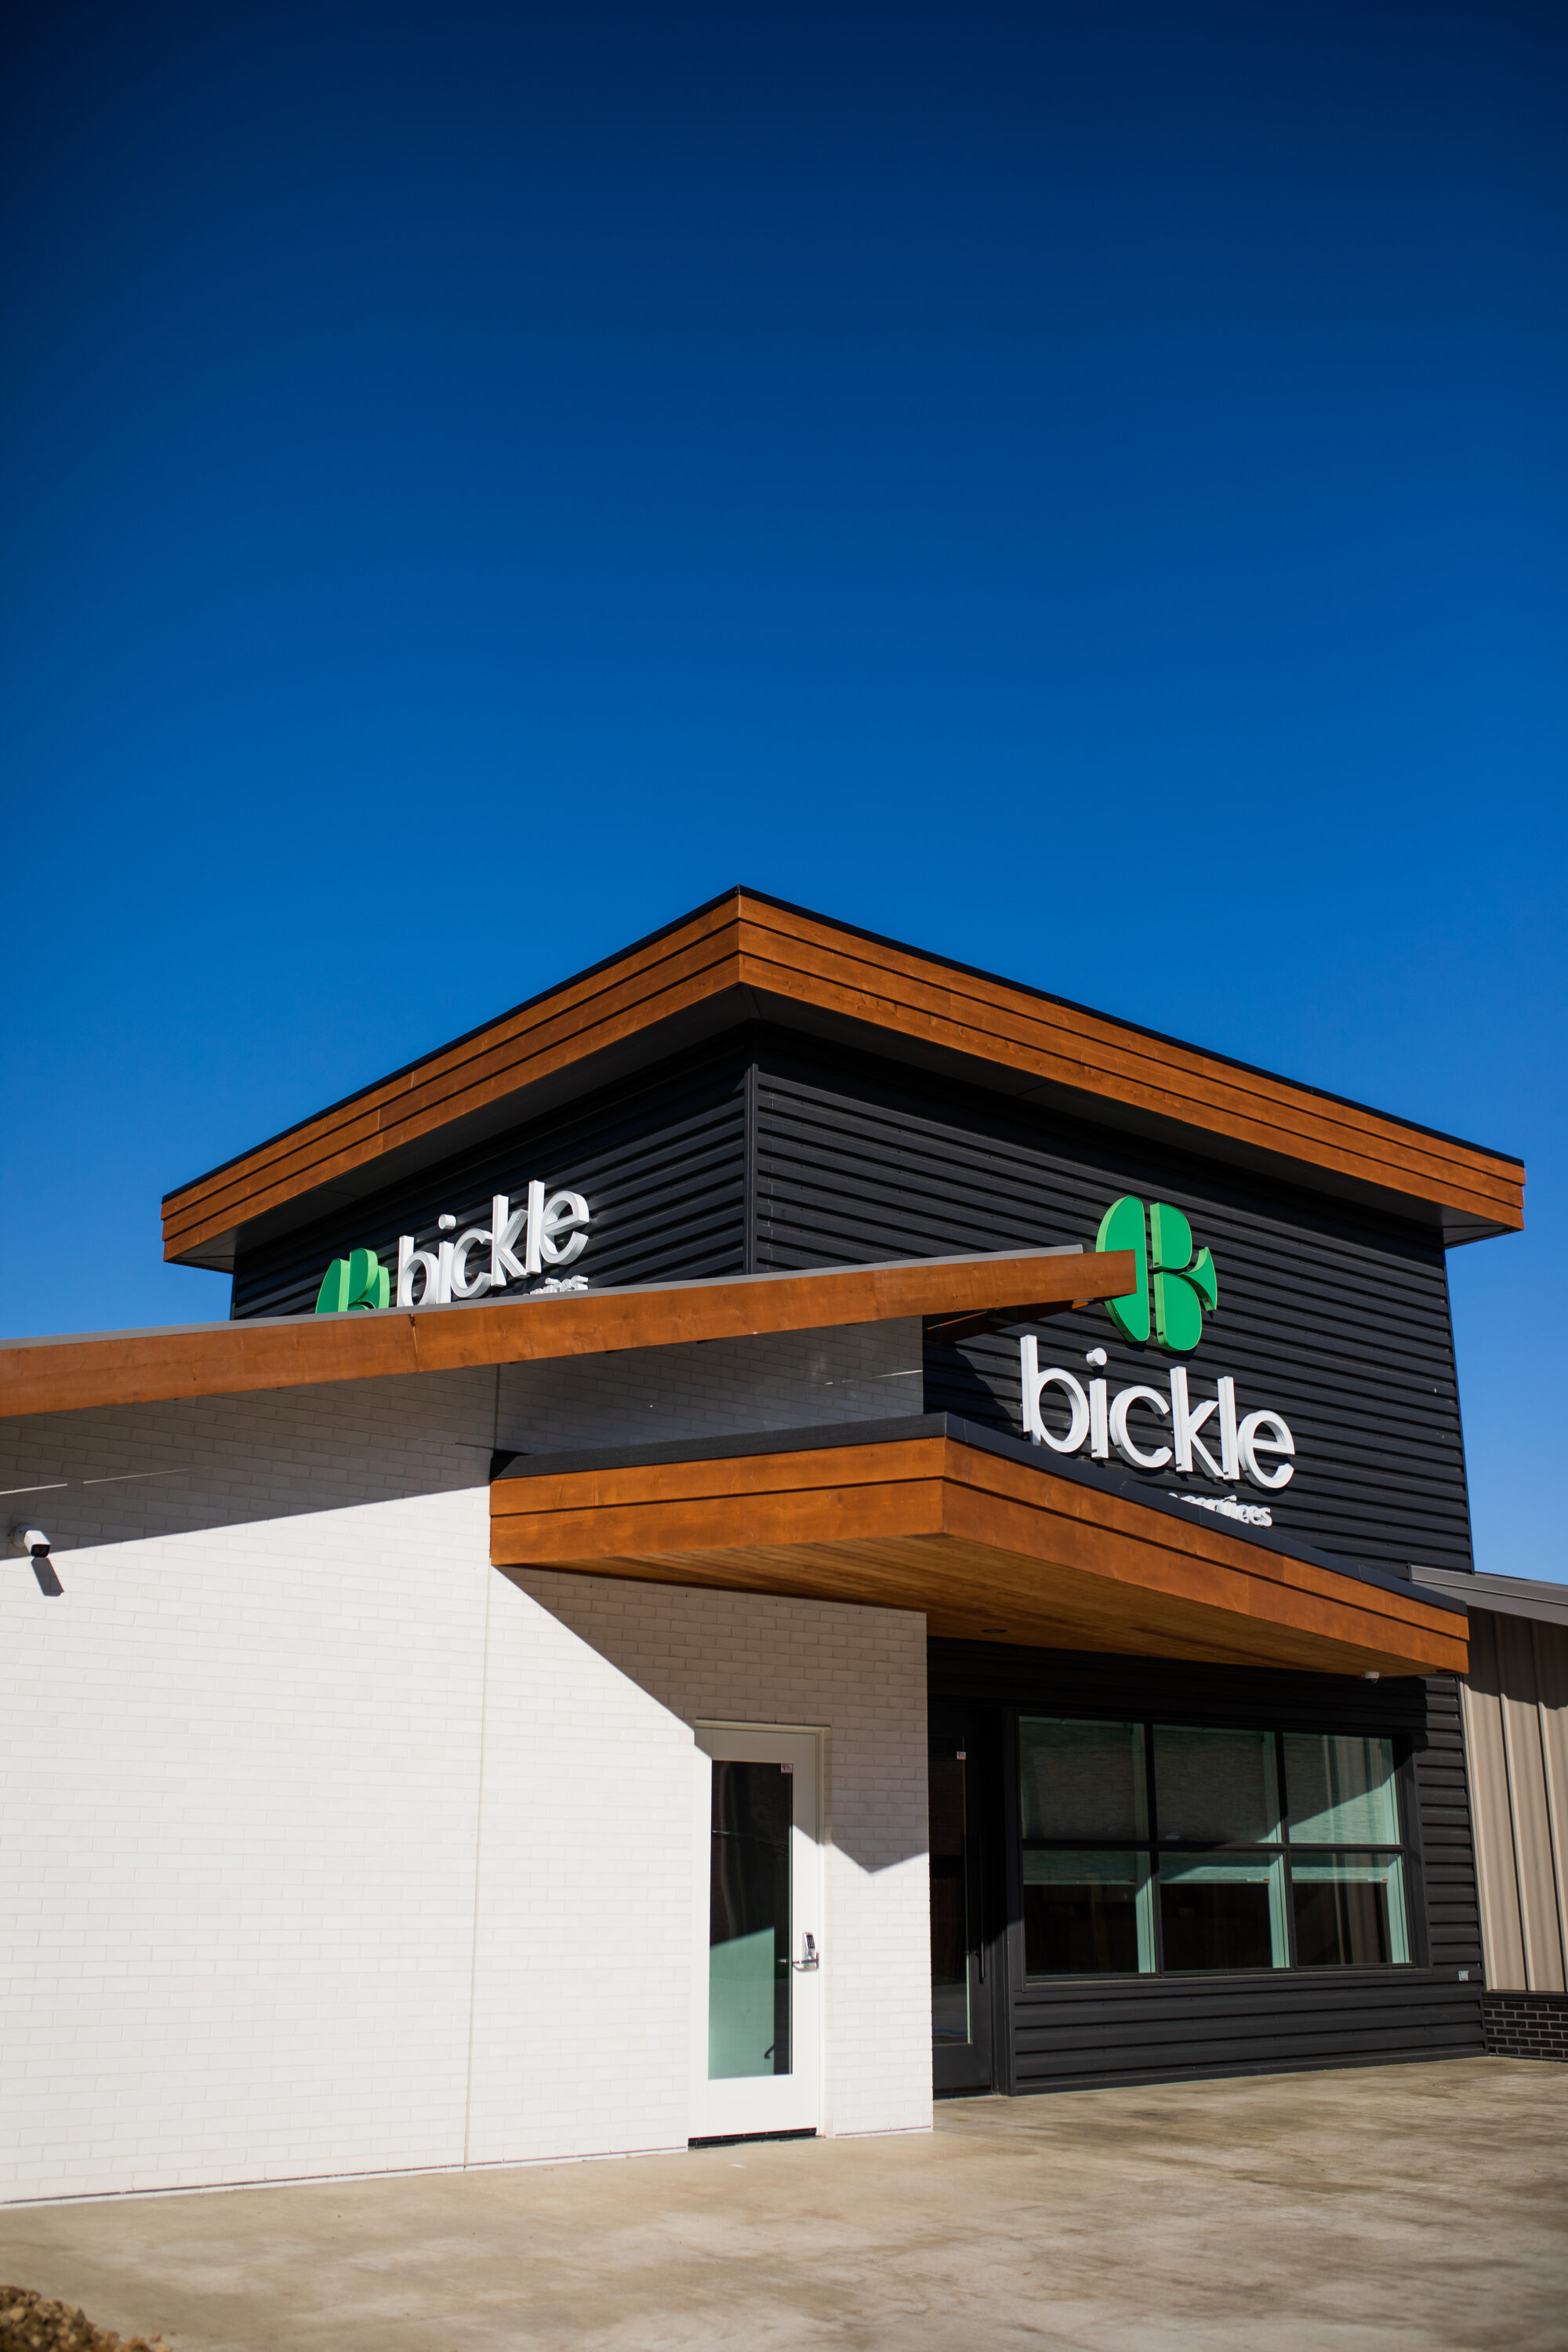 Bickle Insurance Services | VSWC Architects